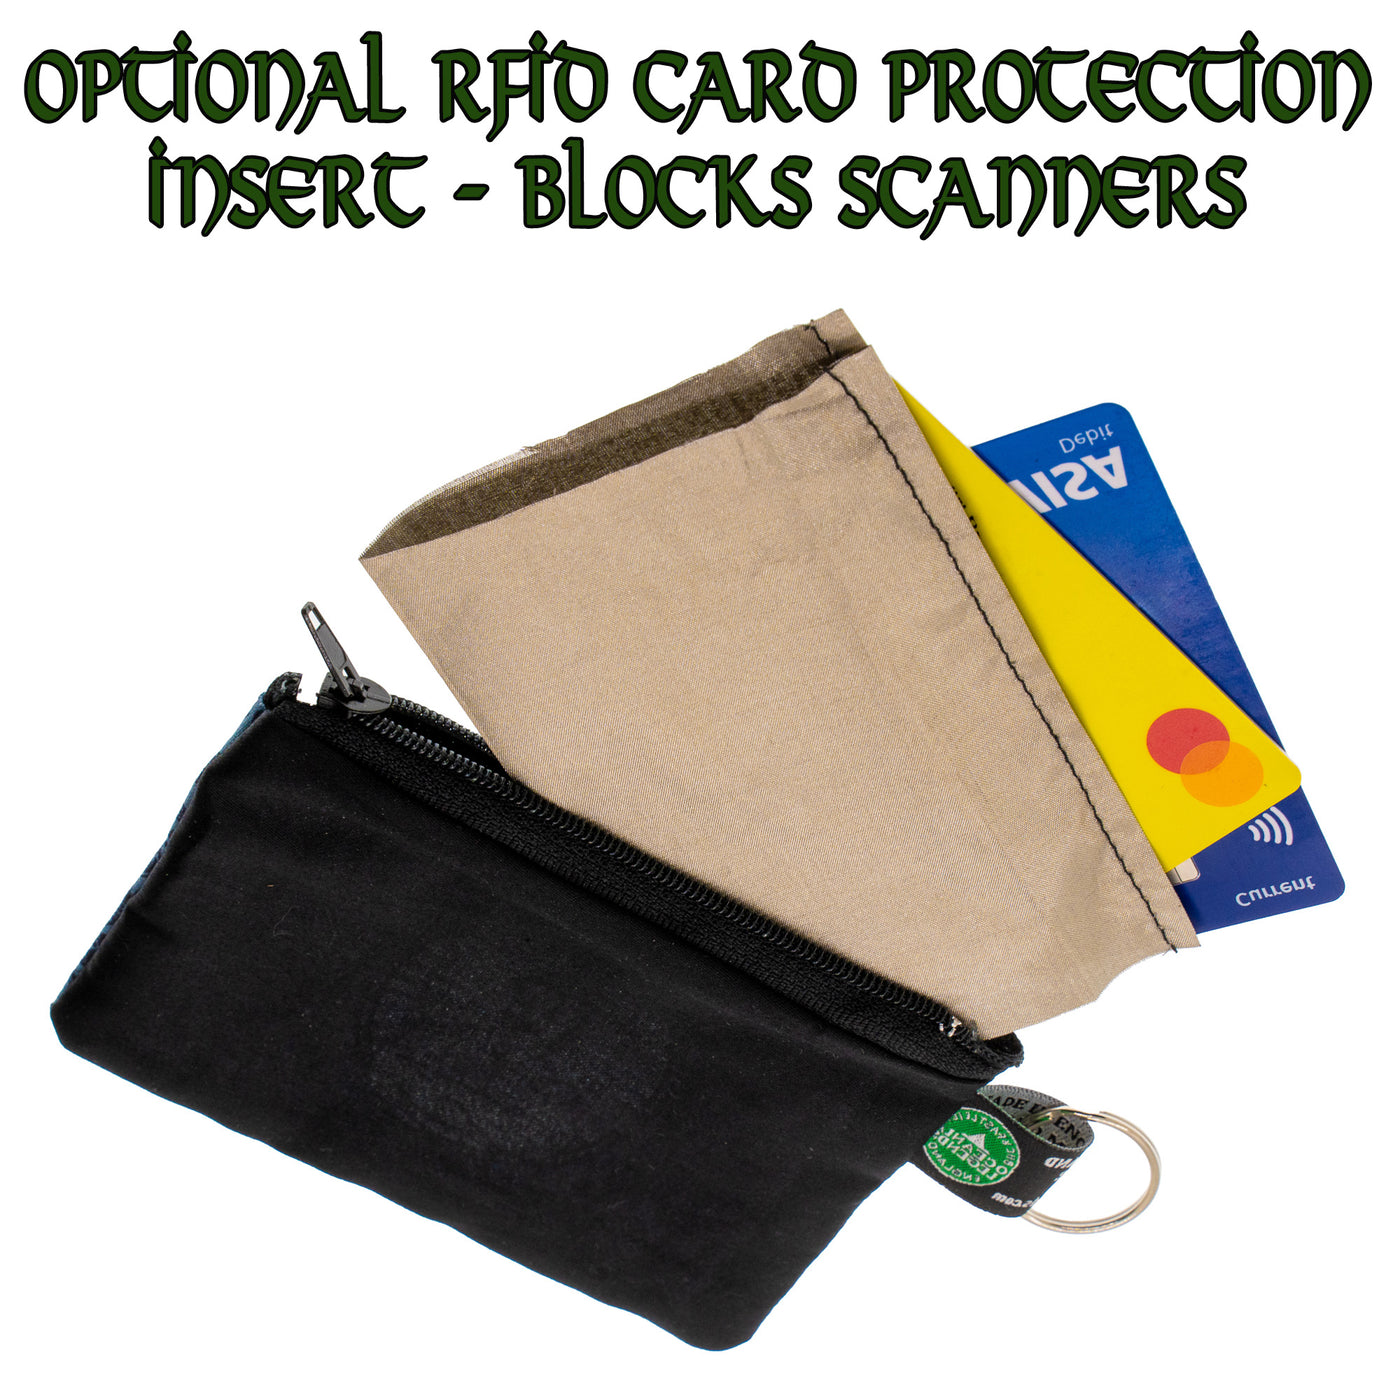 RFID sleeve, blocks card scammers.  Protect your credit & debit cards